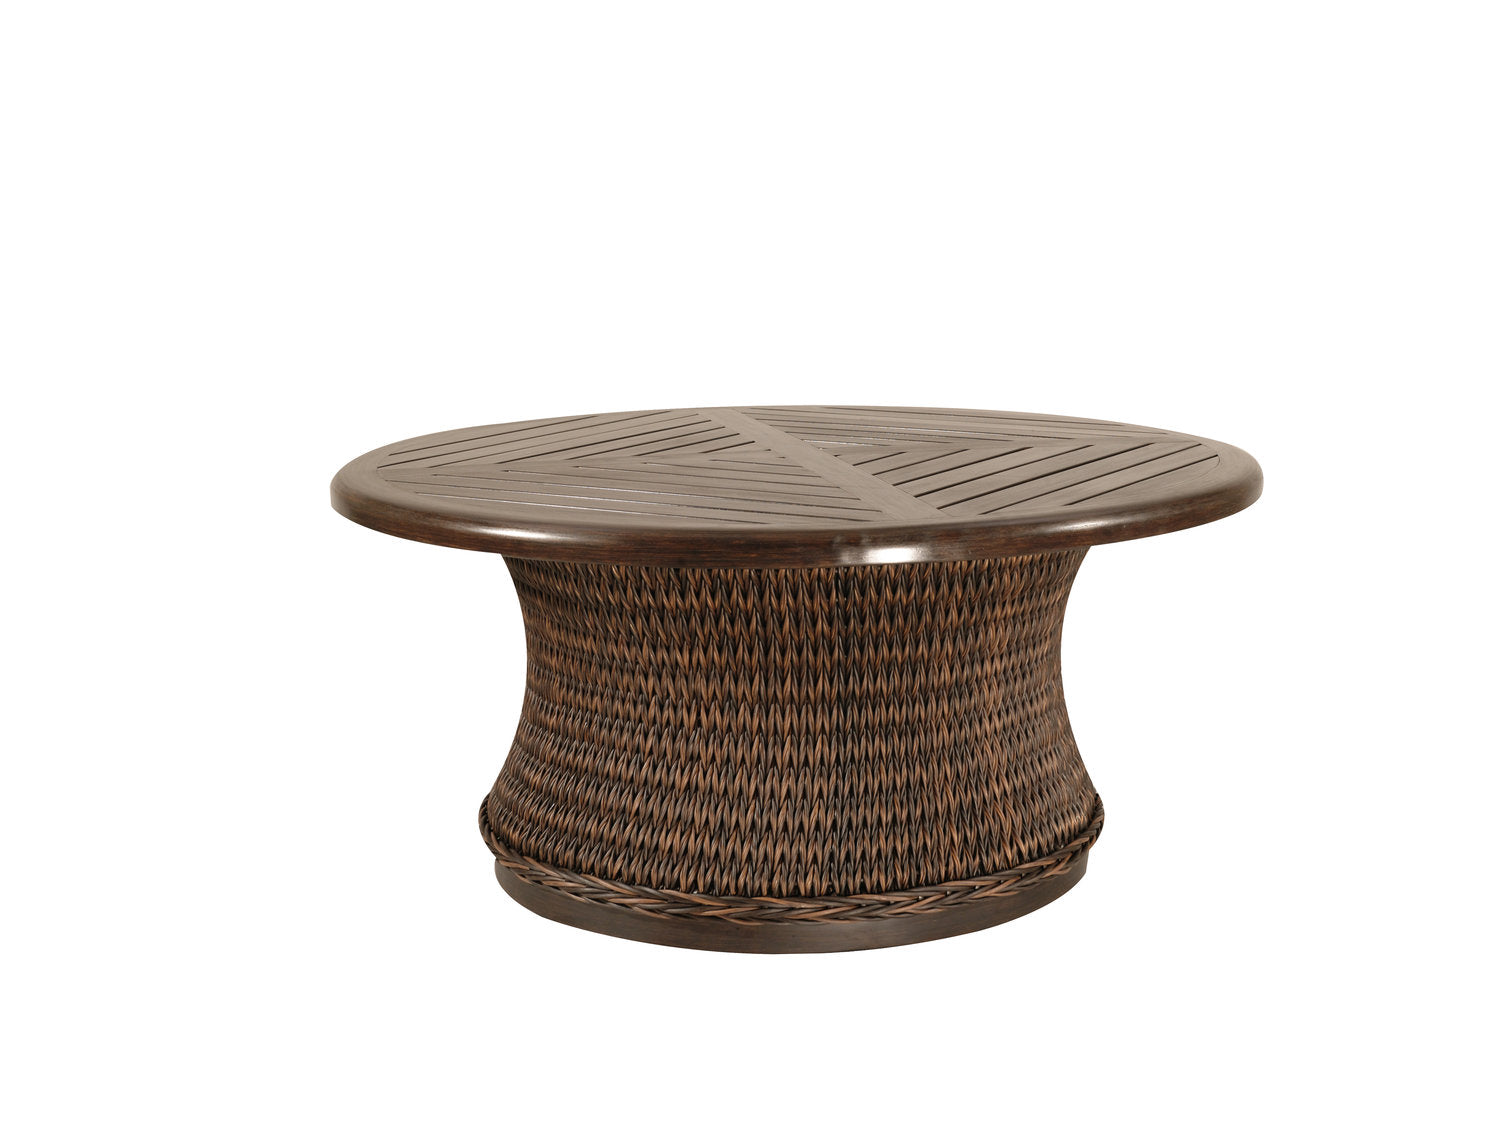 Monticello Round Woven Coffee Table By Patio Renaissance